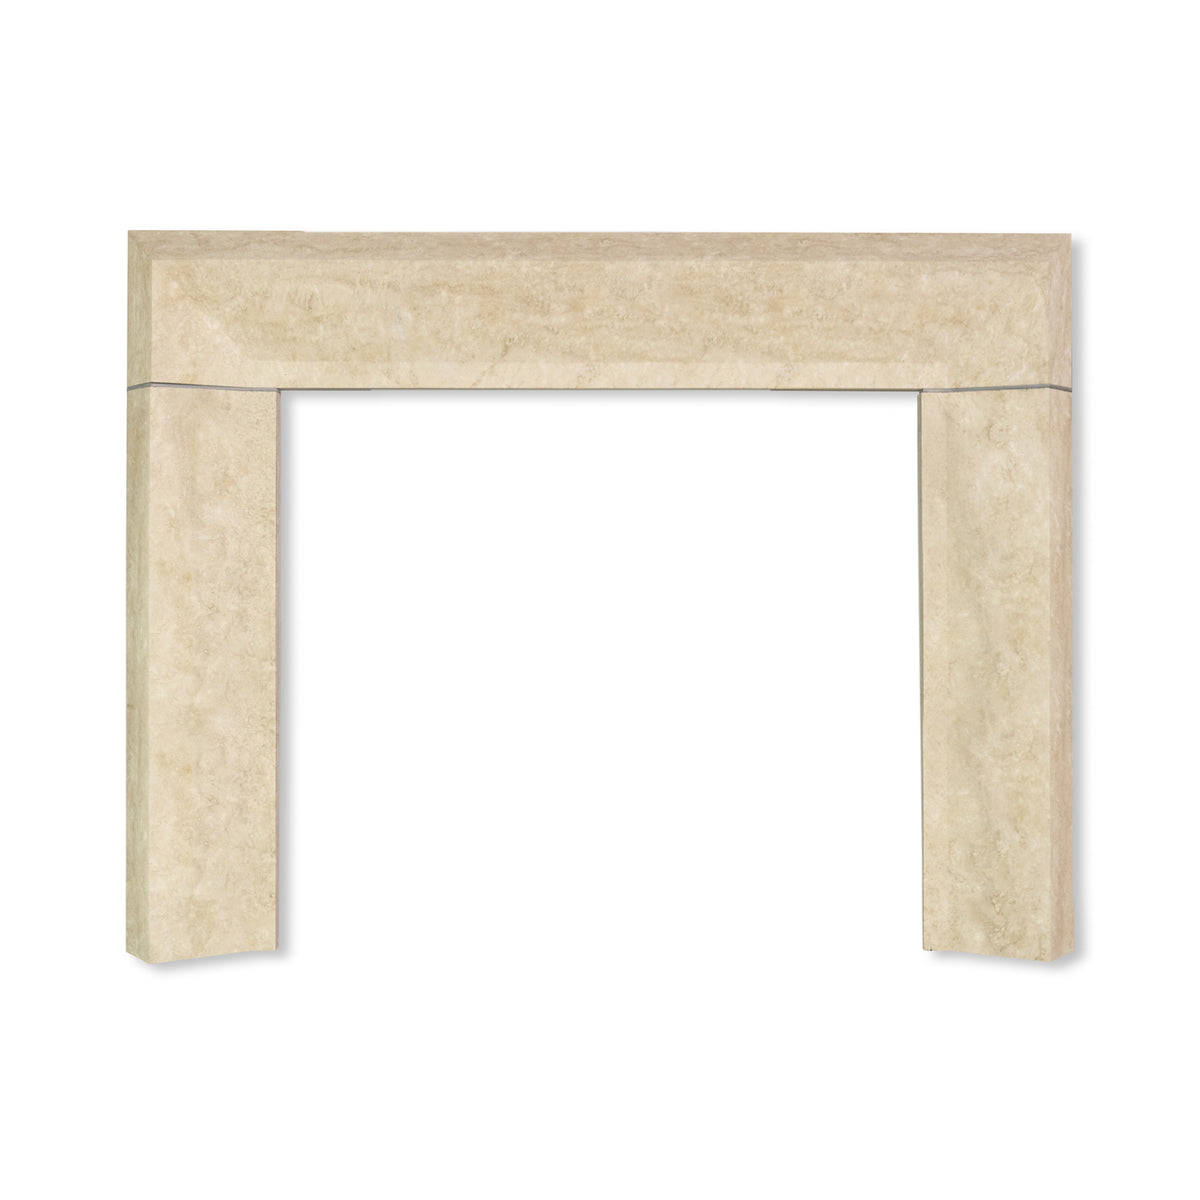 Meridian Fireplace in Latte Travertine with Honed Finish view 1